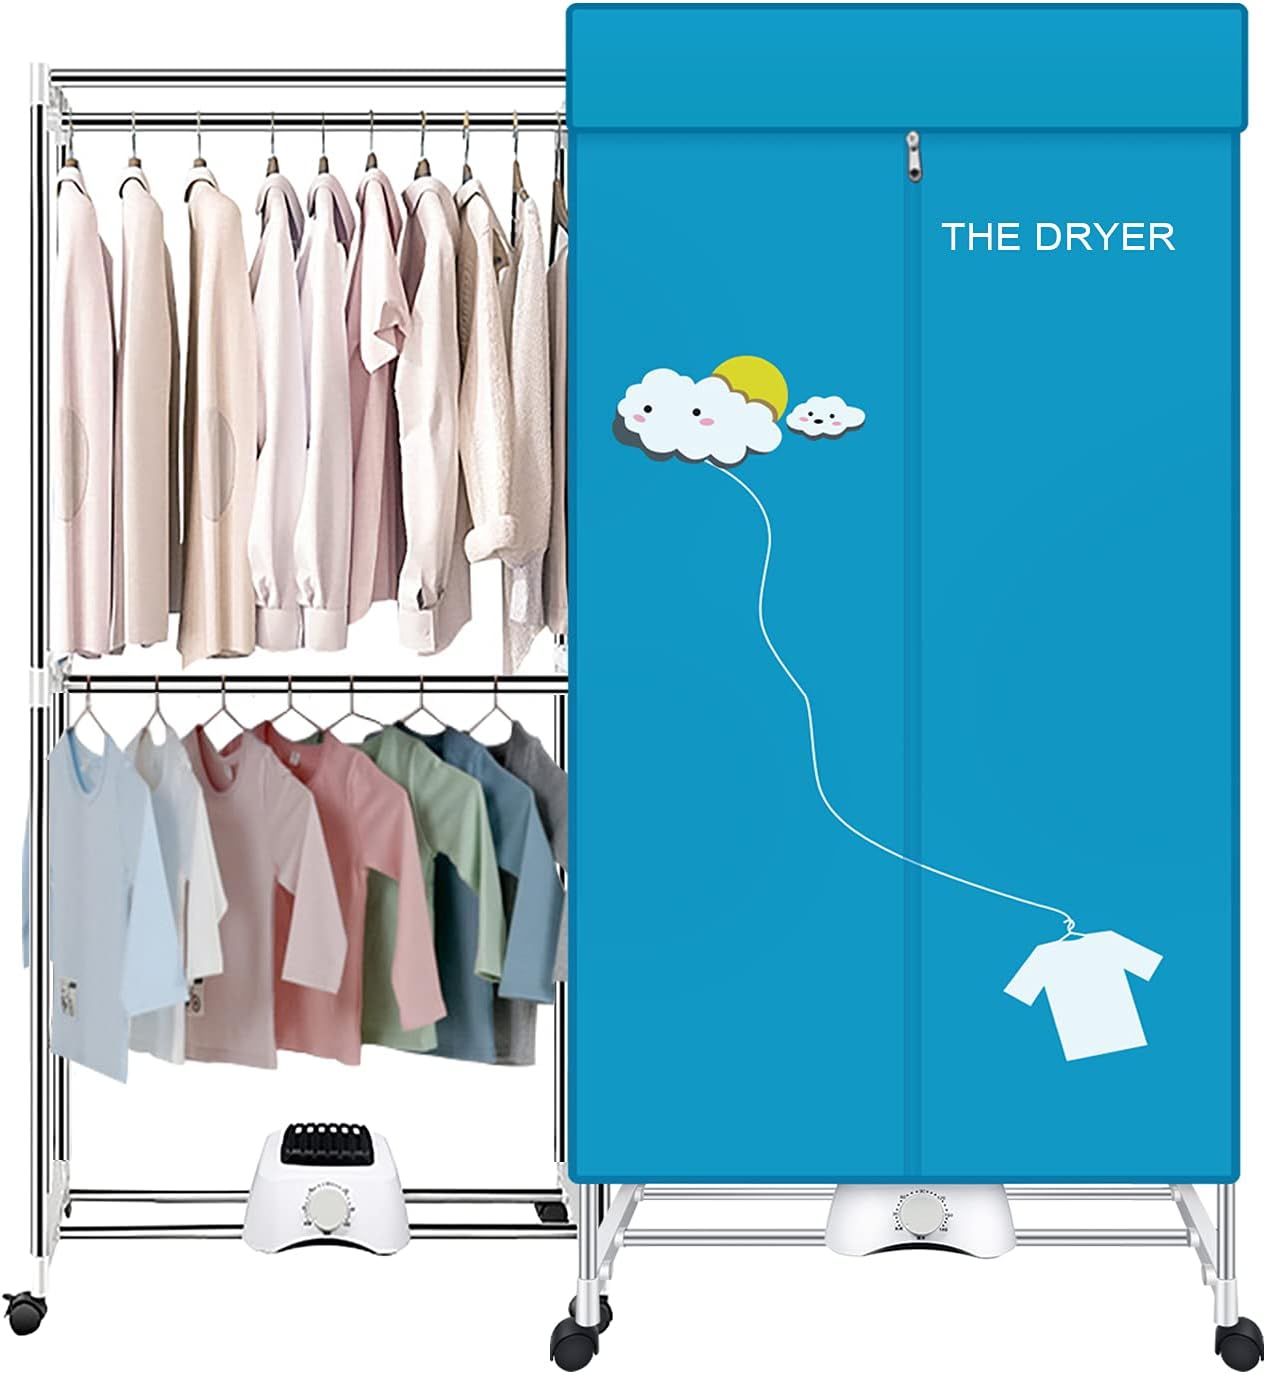 XIAQING Portable Dryer,110V 1000W Electric Clothes Dryer Machine